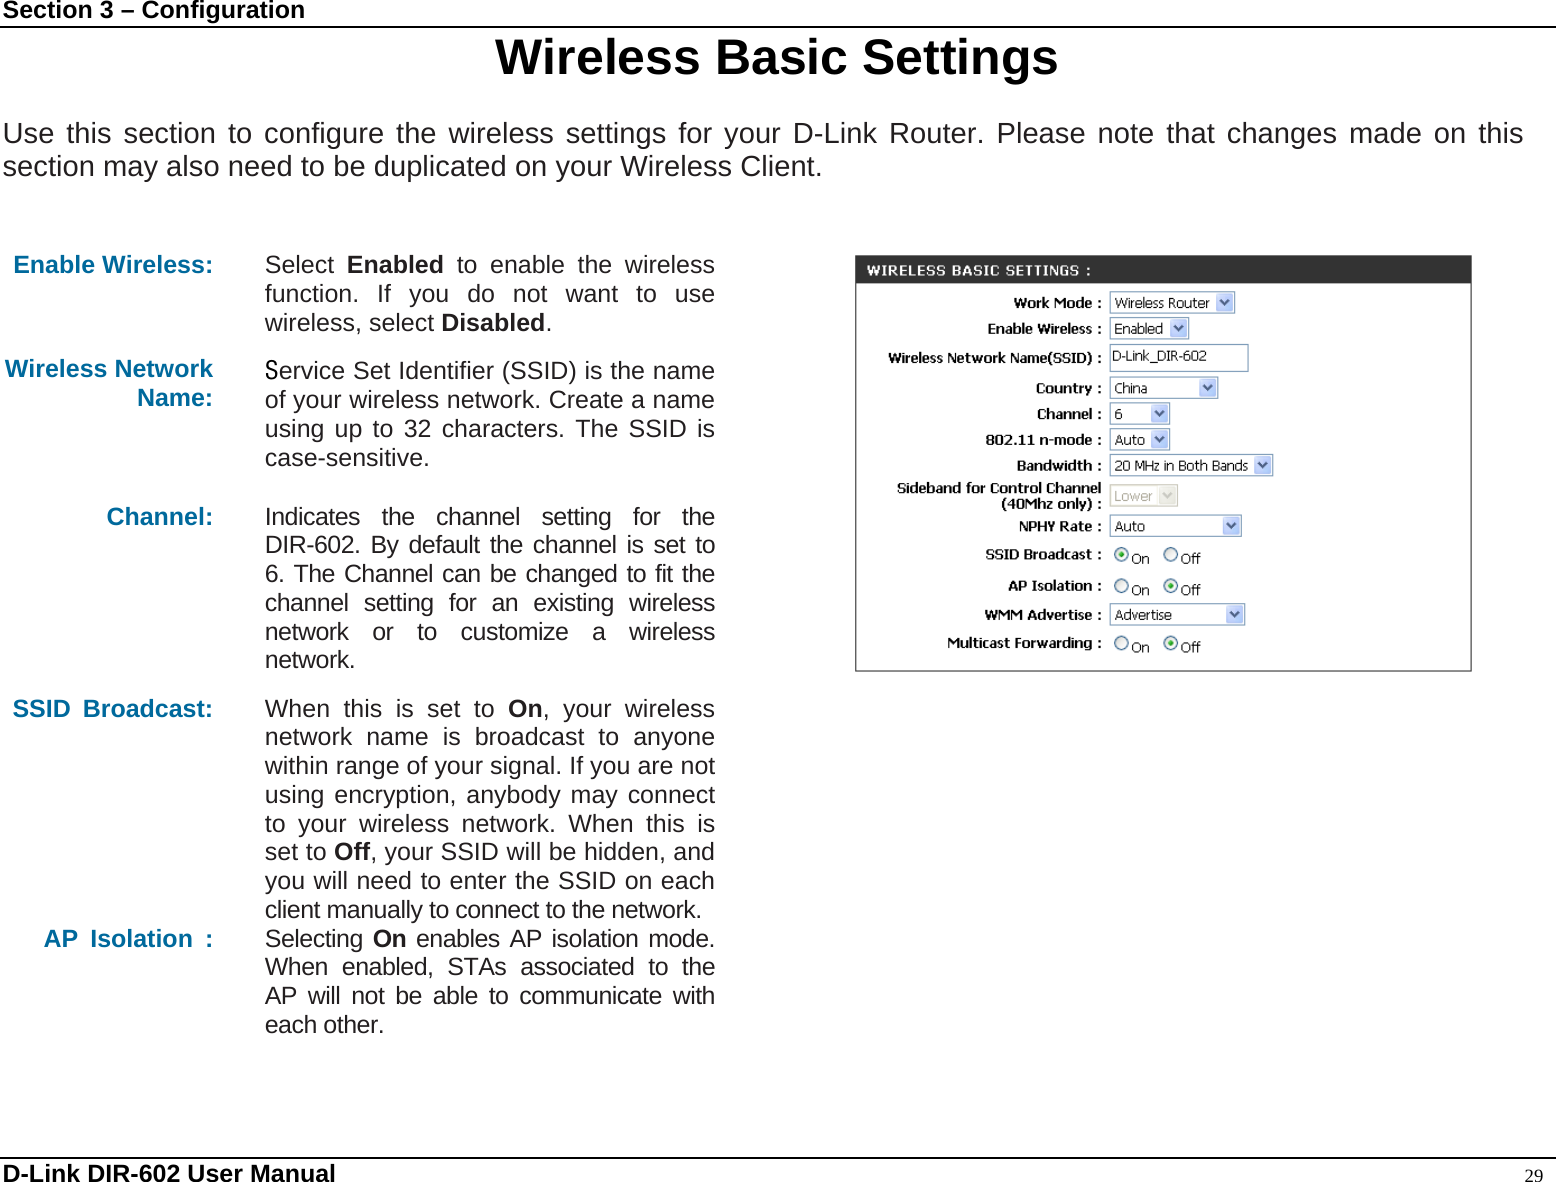 Section 3 – Configuration  Wireless Basic Settings  Use this section to configure the wireless settings for your D-Link Router. Please note that changes made on this section may also need to be duplicated on your Wireless Client.     Enable Wireless:  Select  Enabled to enable the wireless function. If you do not want to use wireless, select Disabled. Wireless Network Name:  Service Set Identifier (SSID) is the name of your wireless network. Create a name using up to 32 characters. The SSID is case-sensitive. Channel:  Indicates the channel setting for the DIR-602. By default the channel is set to 6. The Channel can be changed to fit the channel setting for an existing wireless network or to customize a wireless network. SSID Broadcast:  When this is set to On, your wireless network name is broadcast to anyone within range of your signal. If you are not using encryption, anybody may connect to your wireless network. When this is set to Off, your SSID will be hidden, and you will need to enter the SSID on each client manually to connect to the network. AP Isolation :  Selecting On enables AP isolation mode. When enabled, STAs associated to the AP will not be able to communicate with each other.    D-Link DIR-602 User Manual                                                                                               29 